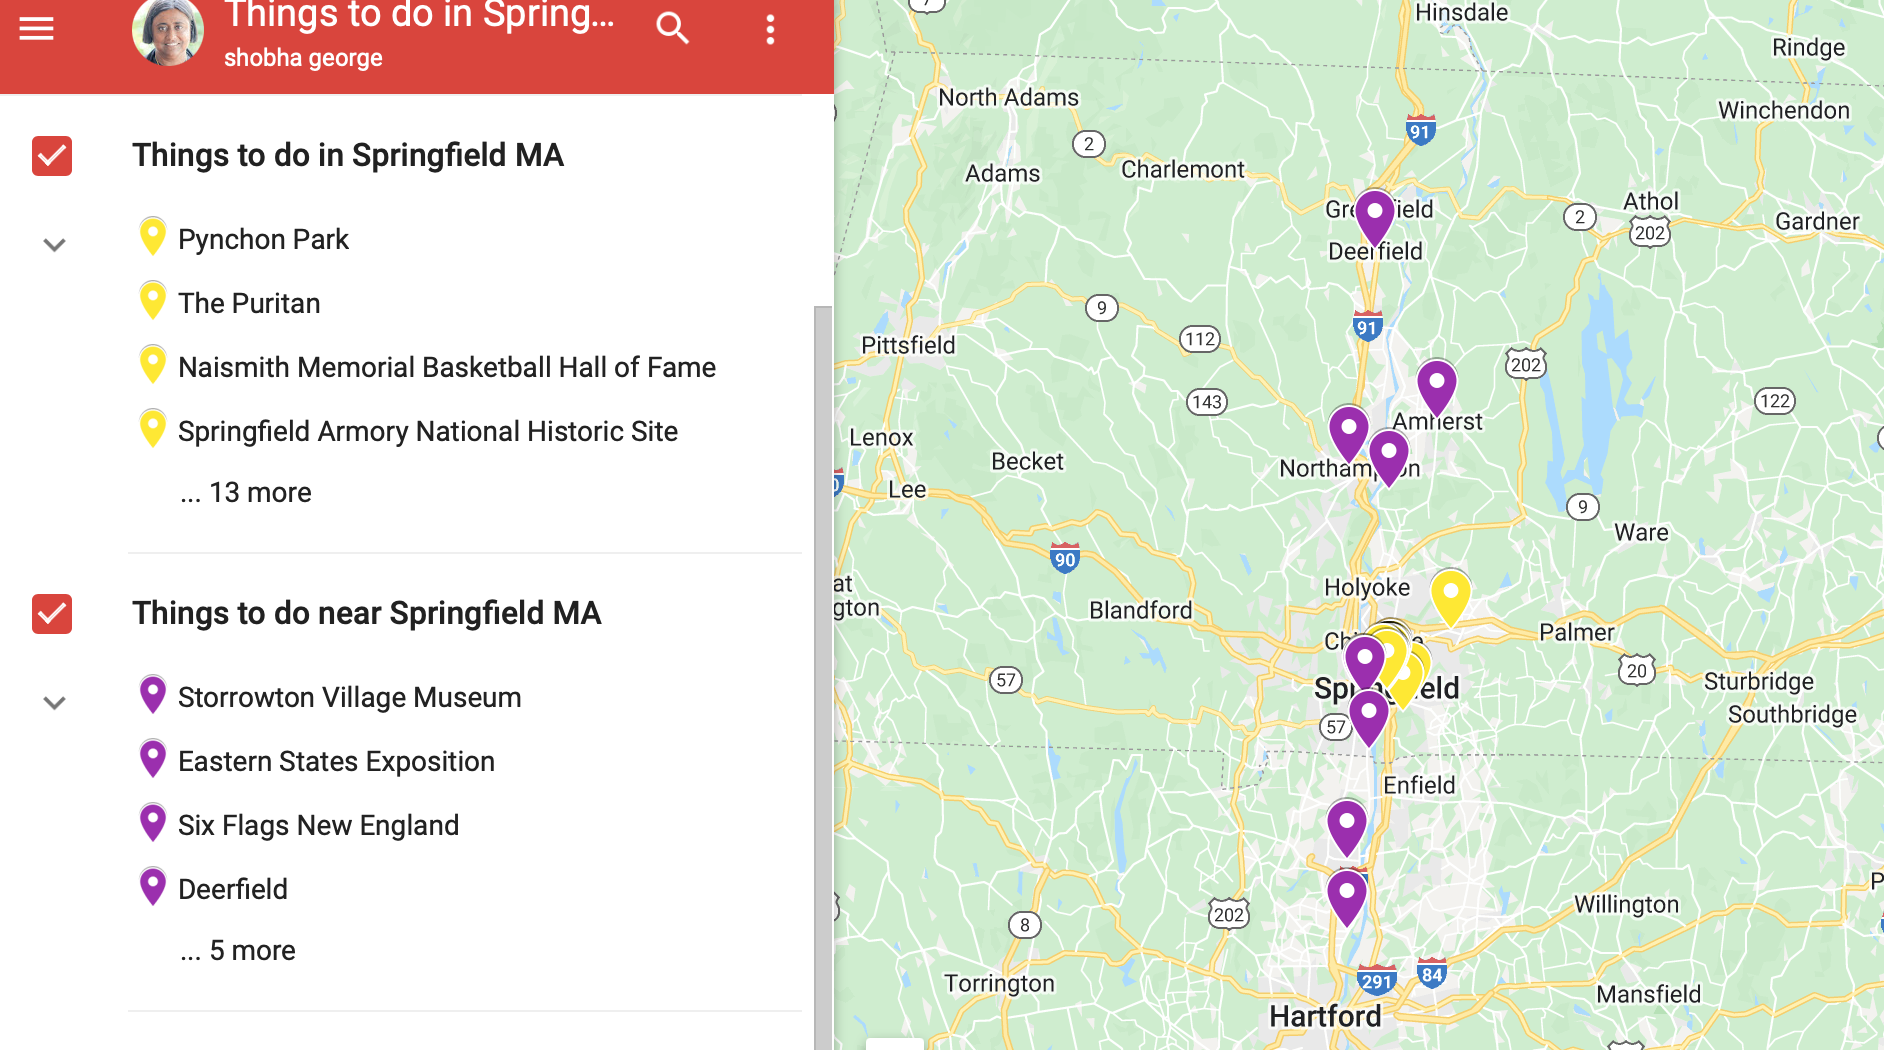 map of things to do in Springfield MA